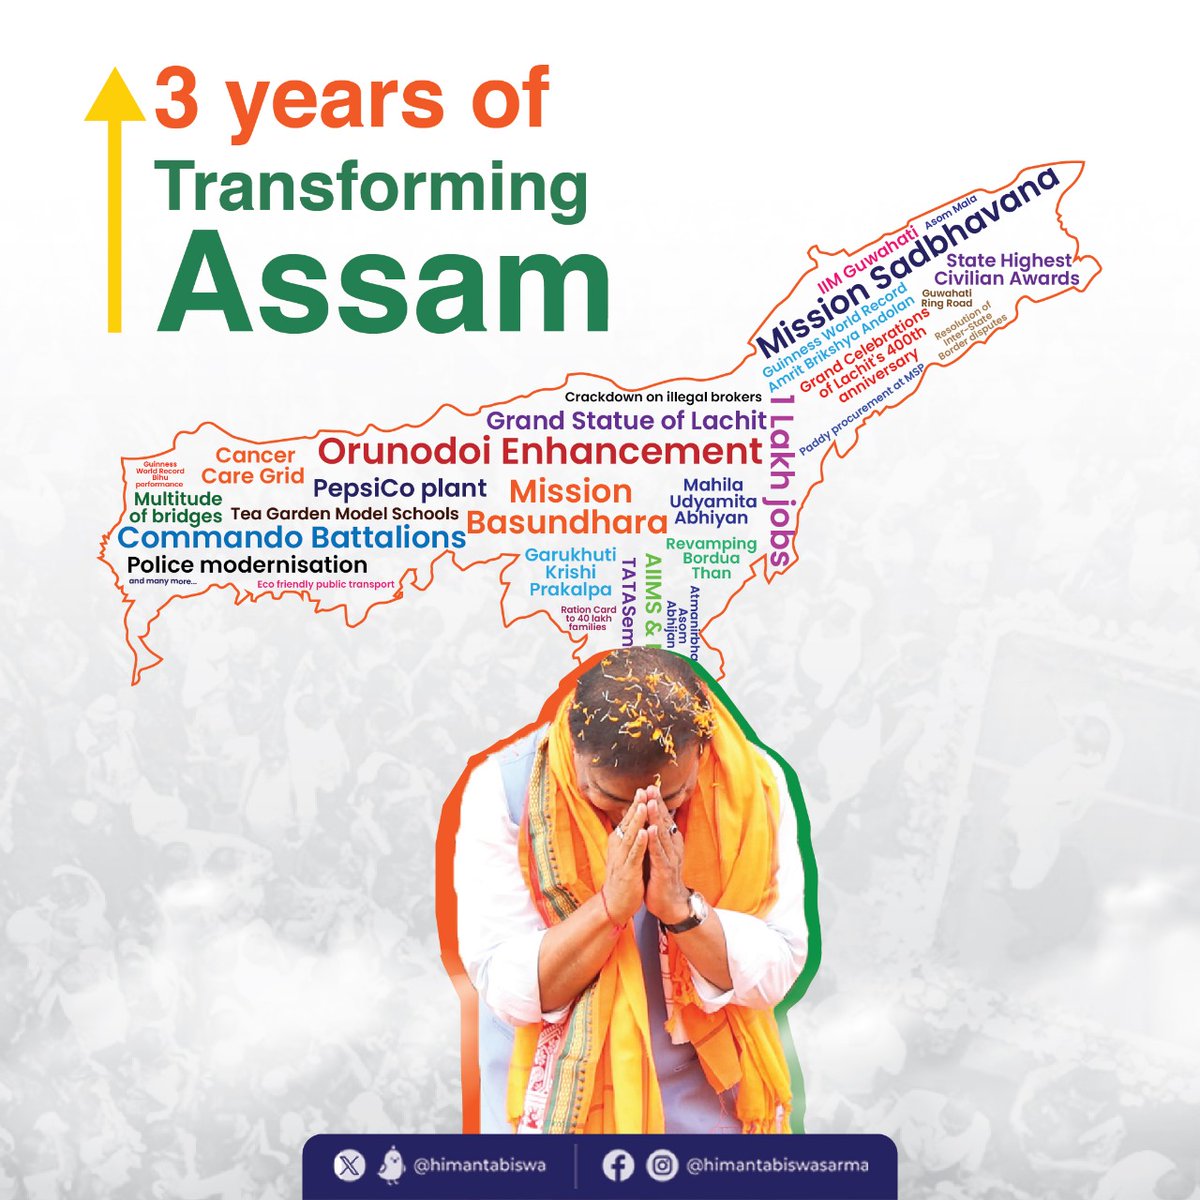 On May 10, 2021 we embarked on a journey to transform Assam and take it to the next league of development with the blessings of the people and guidance of Hon'ble Prime Minister Shri @narendramodi ji. As we complete 3yrs today, I reiterate our commitment to build a Viksit Assam!